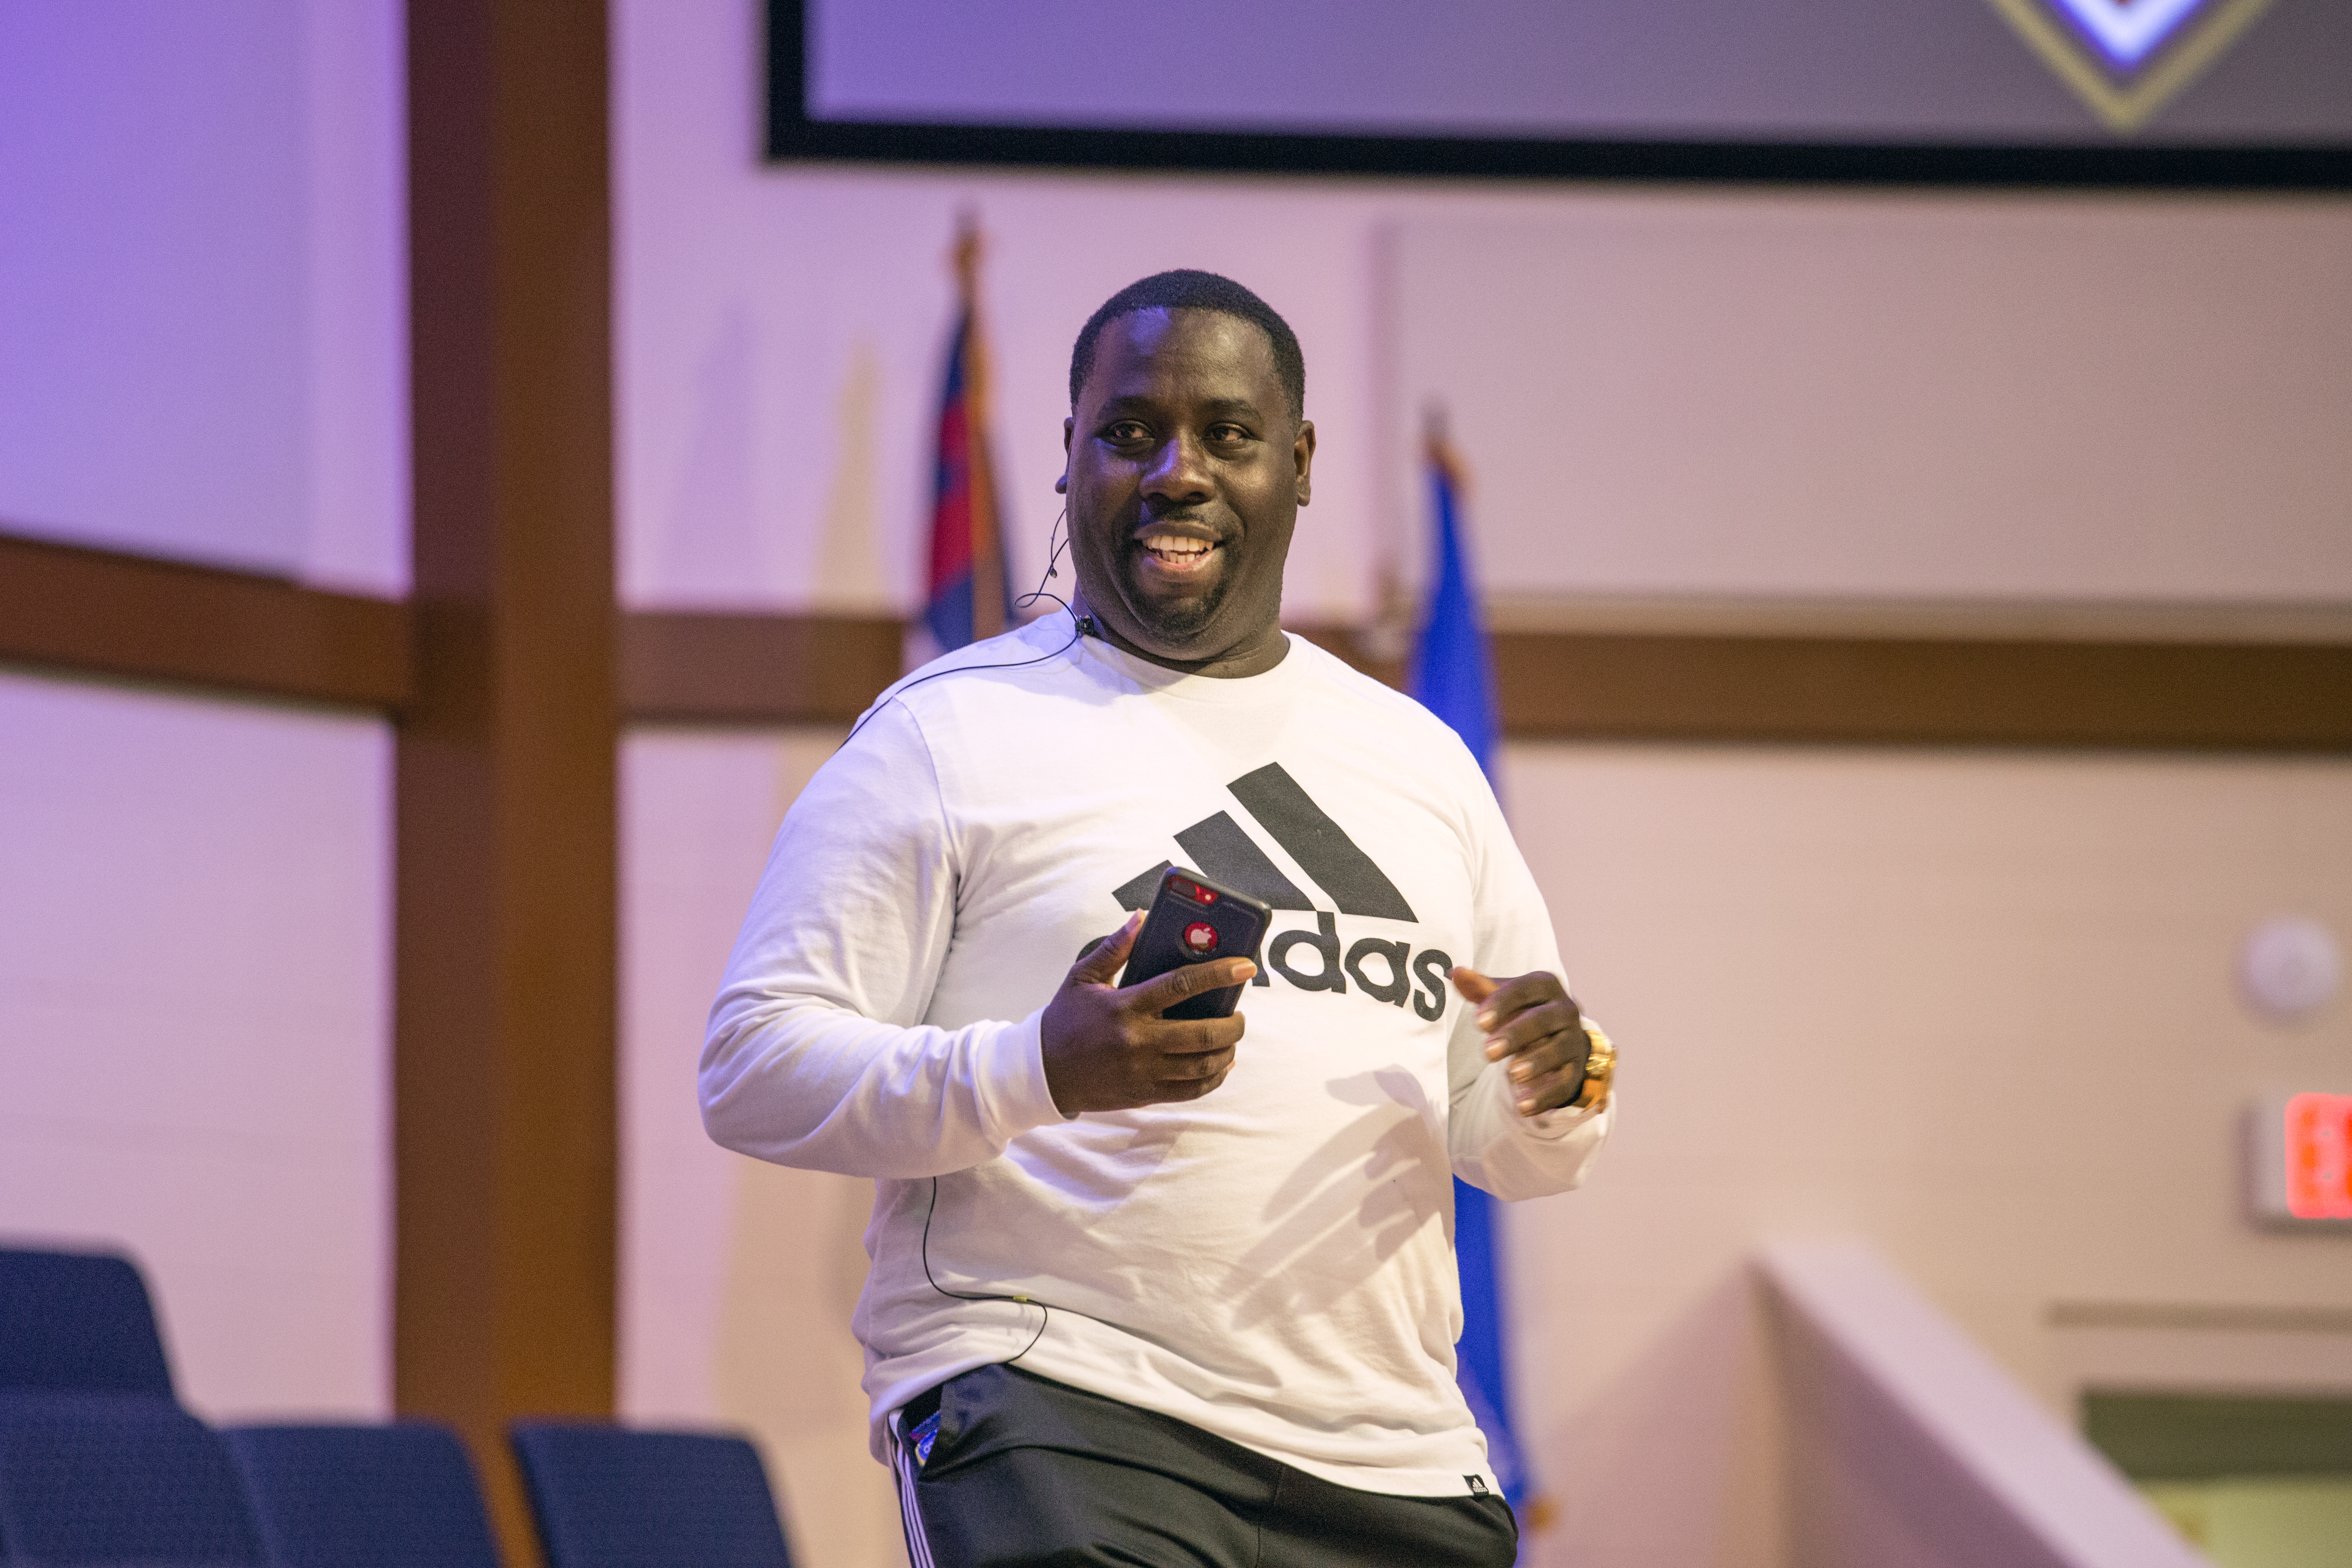 Vandeon Griffin, associate director of NAD Youth Ministries encourages PBE participants to cast their allegiance to God no matter the consequences.